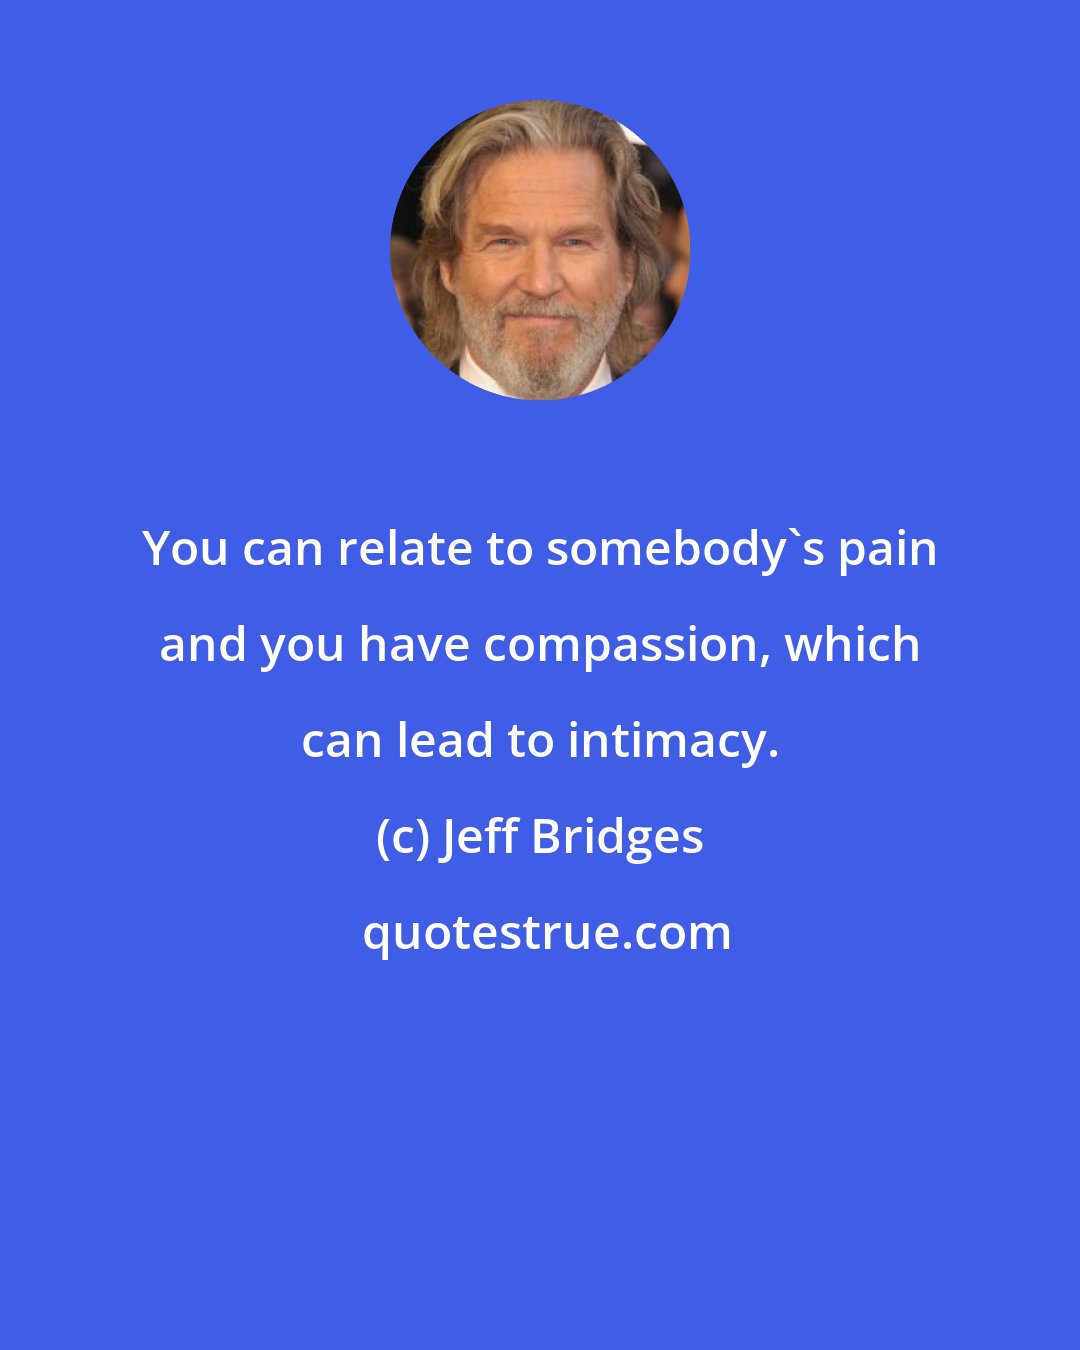 Jeff Bridges: You can relate to somebody's pain and you have compassion, which can lead to intimacy.